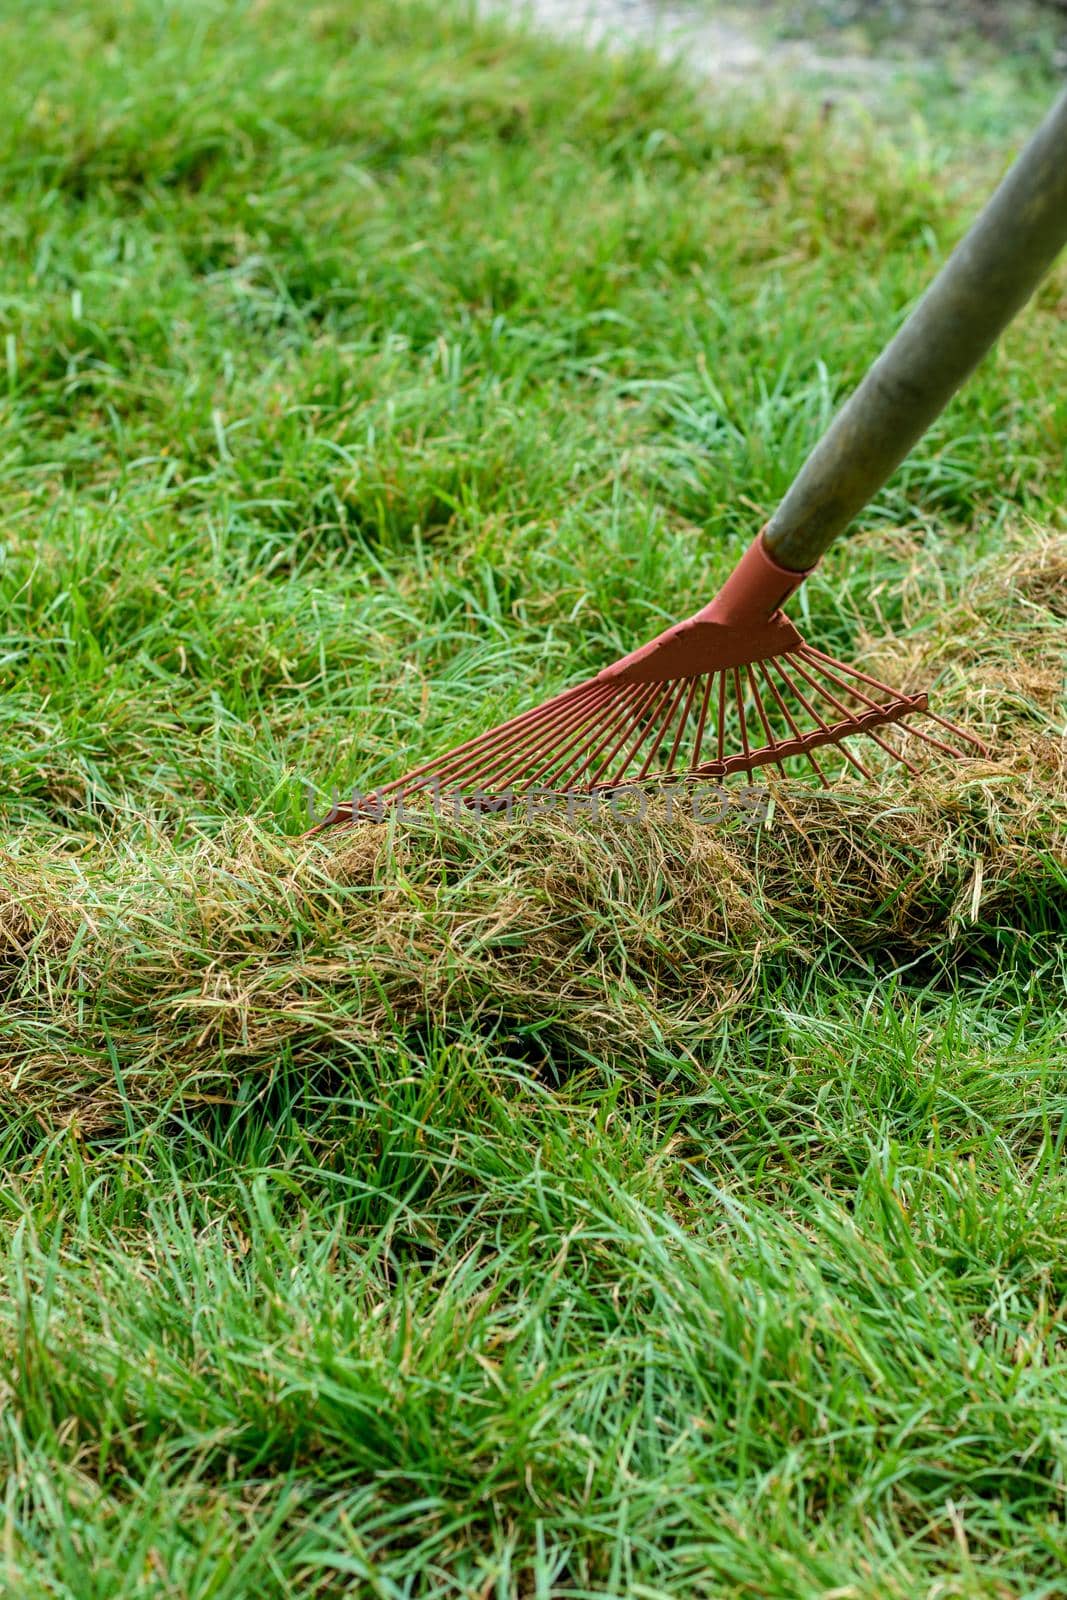 Cleaning of garbage and dry grass from the lawn with a fan rake by Madhourse